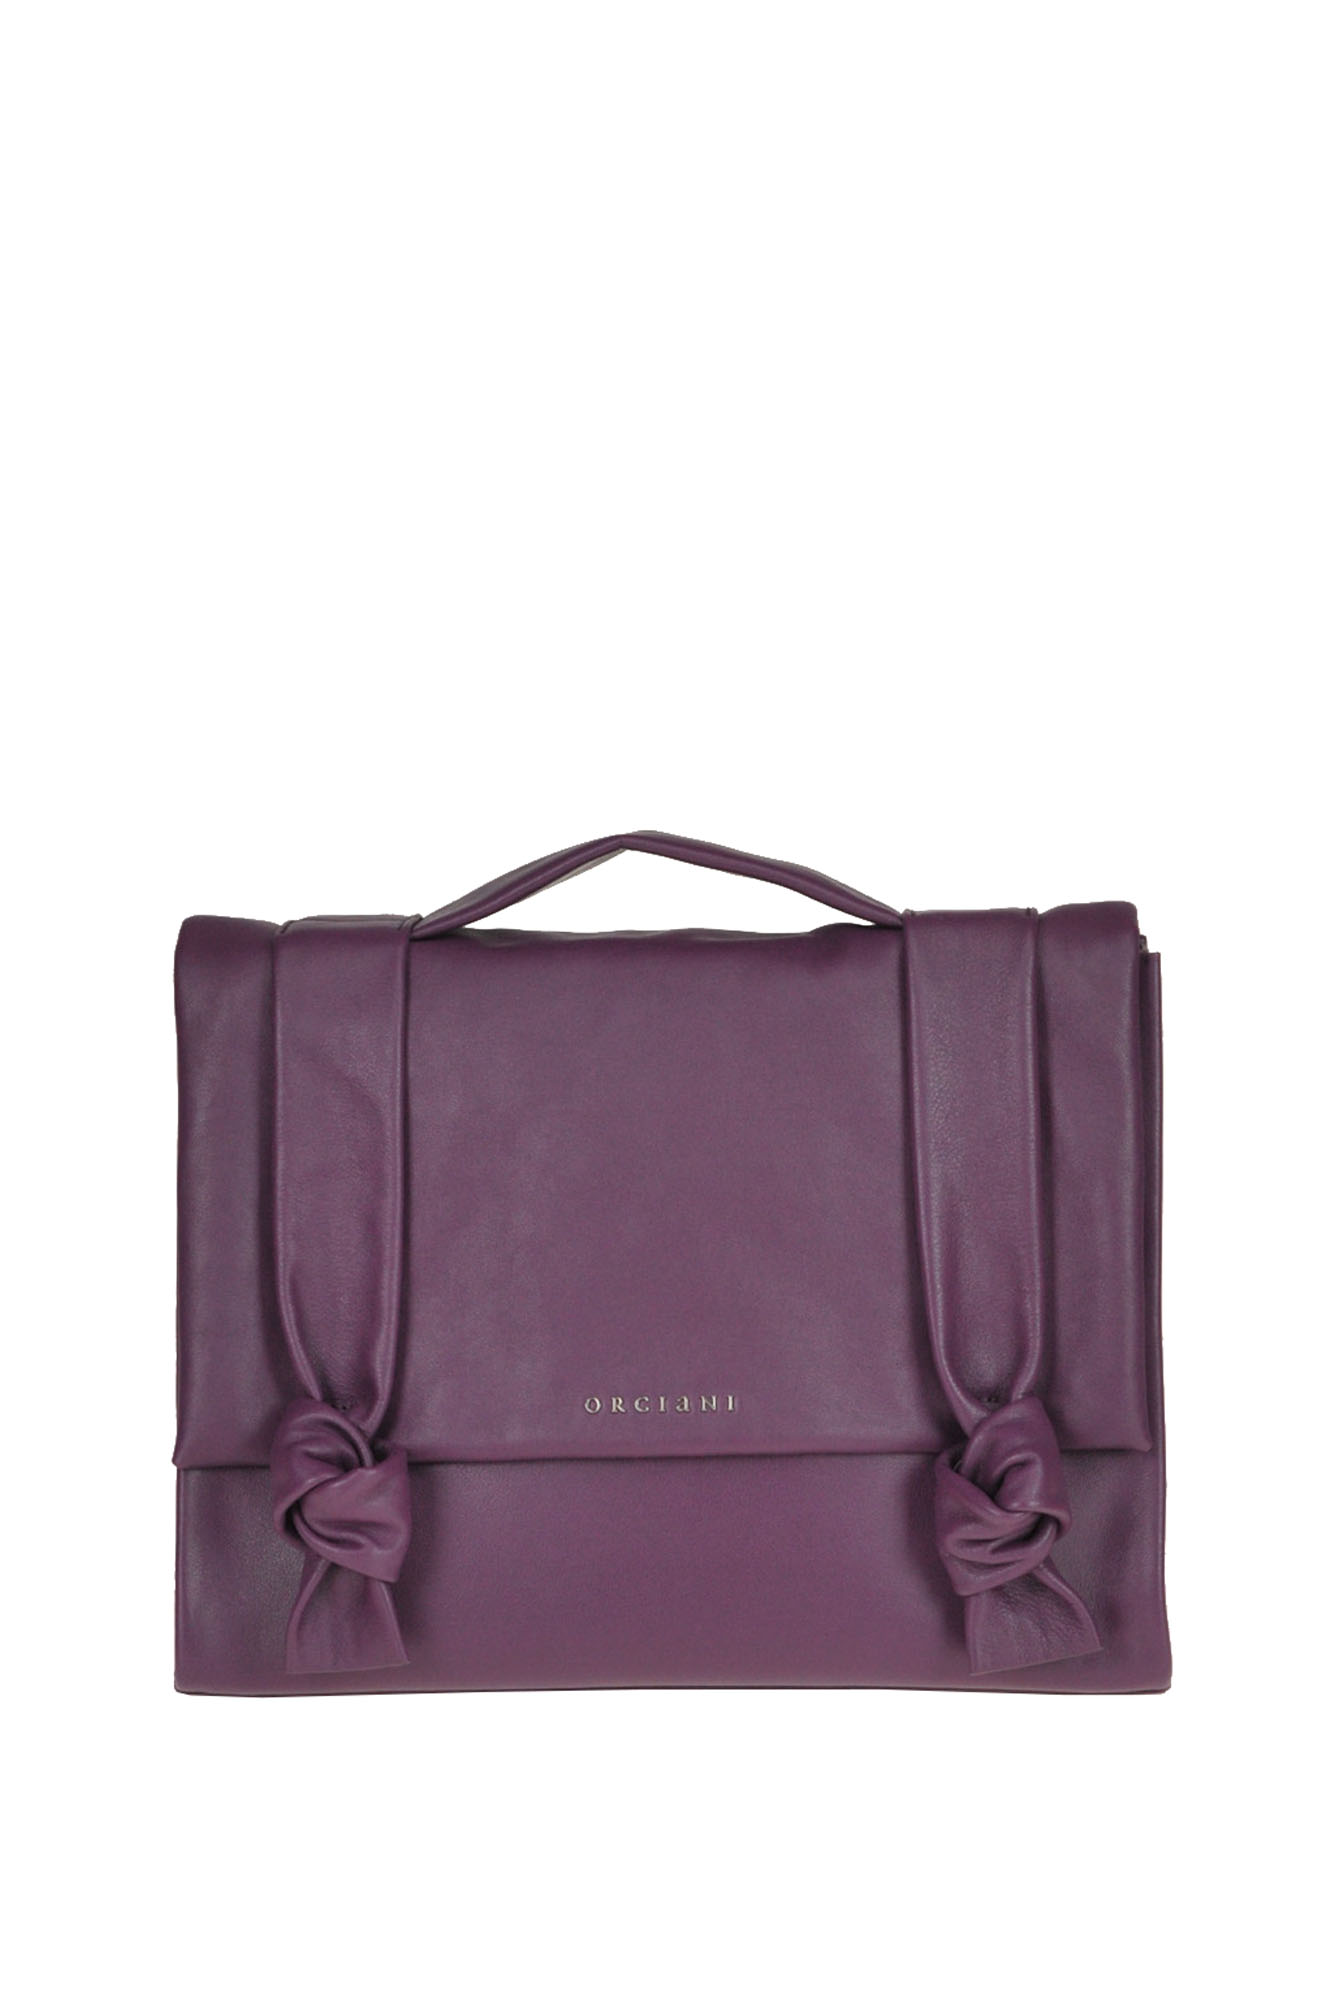 Orciani Bella Leather Bag In Plum